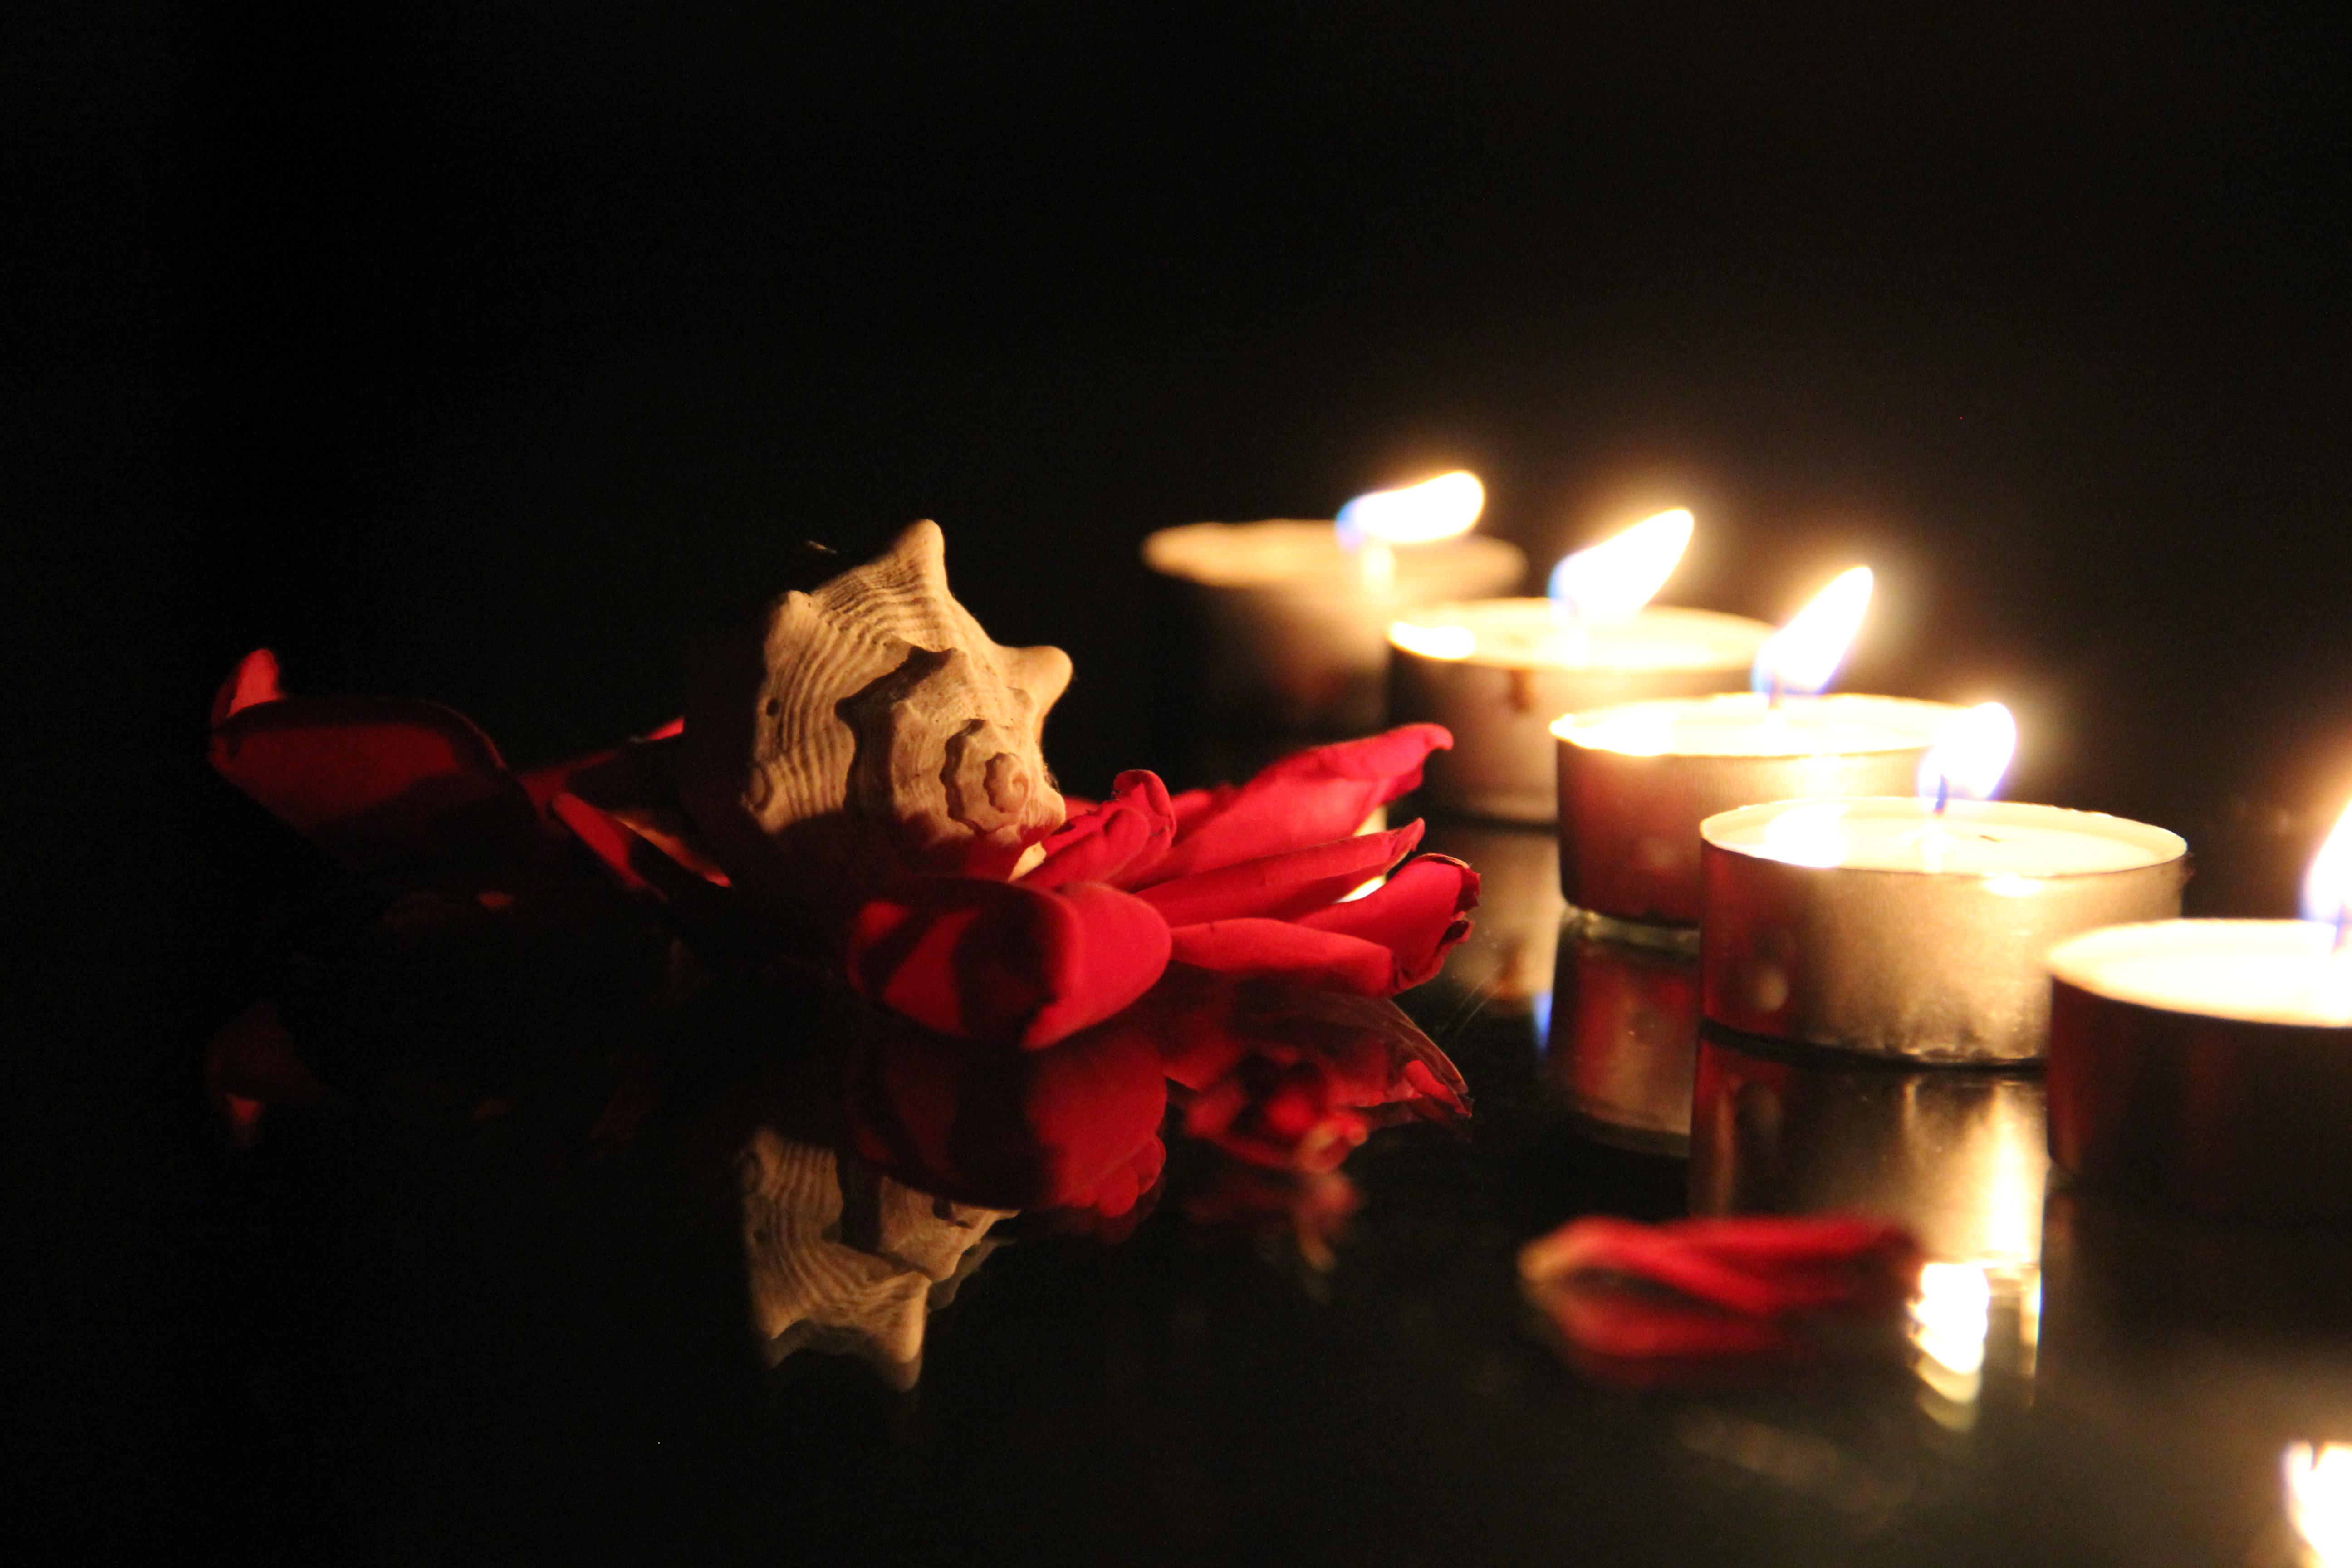 Candle and Roses Desktop Wallpaper